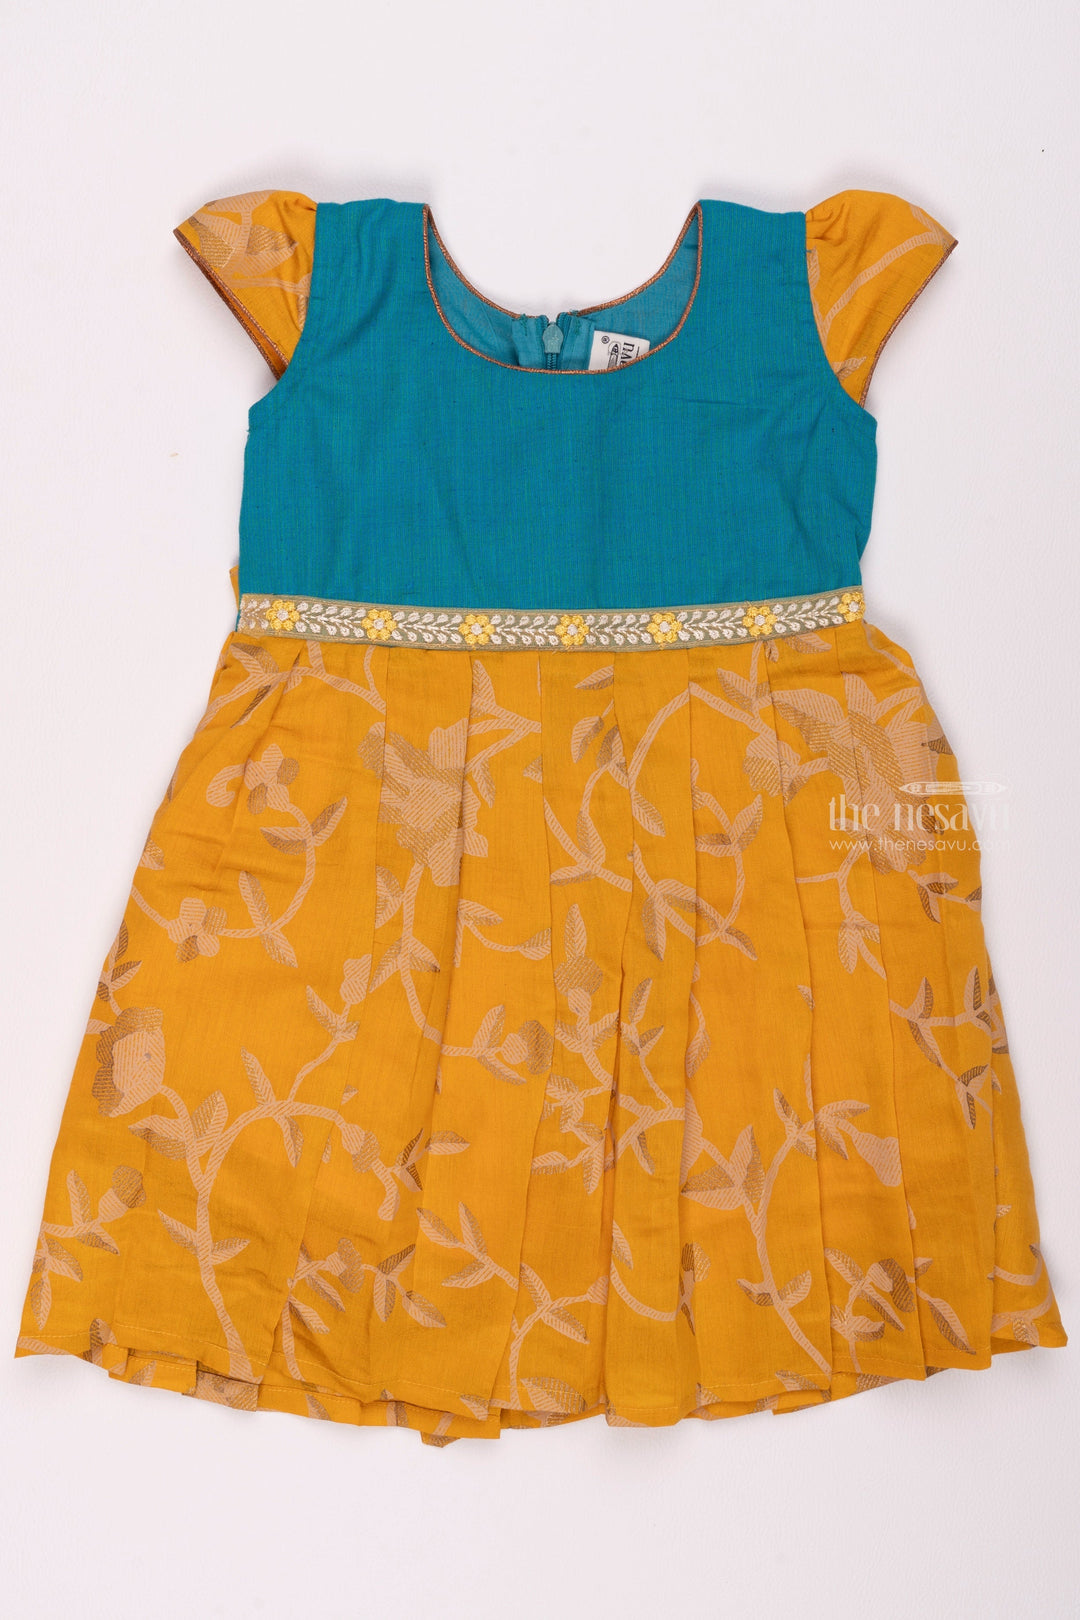 The Nesavu Girls Cotton Frock New Designs of Frocks - Yellow Floral Beauty Cotton Frock with Blue Yoke for Girls Nesavu 16 (1Y) / Yellow / Chanderi GFC1134A-16 Knee-length Cotton Frock | Baby Frock Cotton | The Nesavu